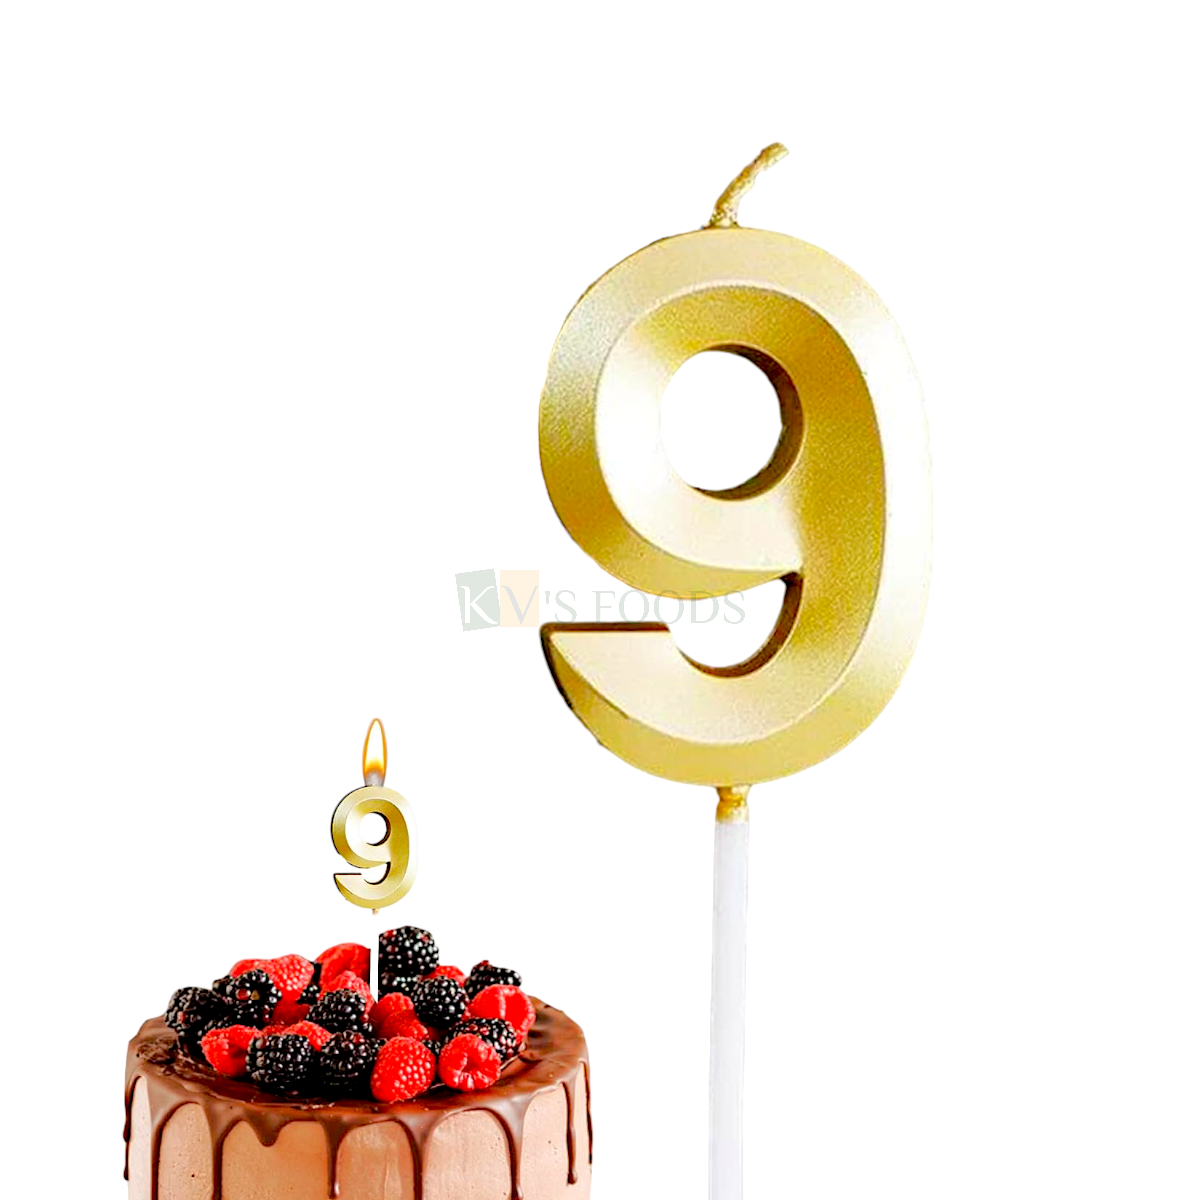 1PC Metallic Golden Colour Shiny 9 Number Wax Candle Cake Topper, Birthday Candles, 9th Birthday Candle Cake Topper, Nine Number Theme Candle Insert 9 Years Old Birthday Party DIY Cupcake Decorations